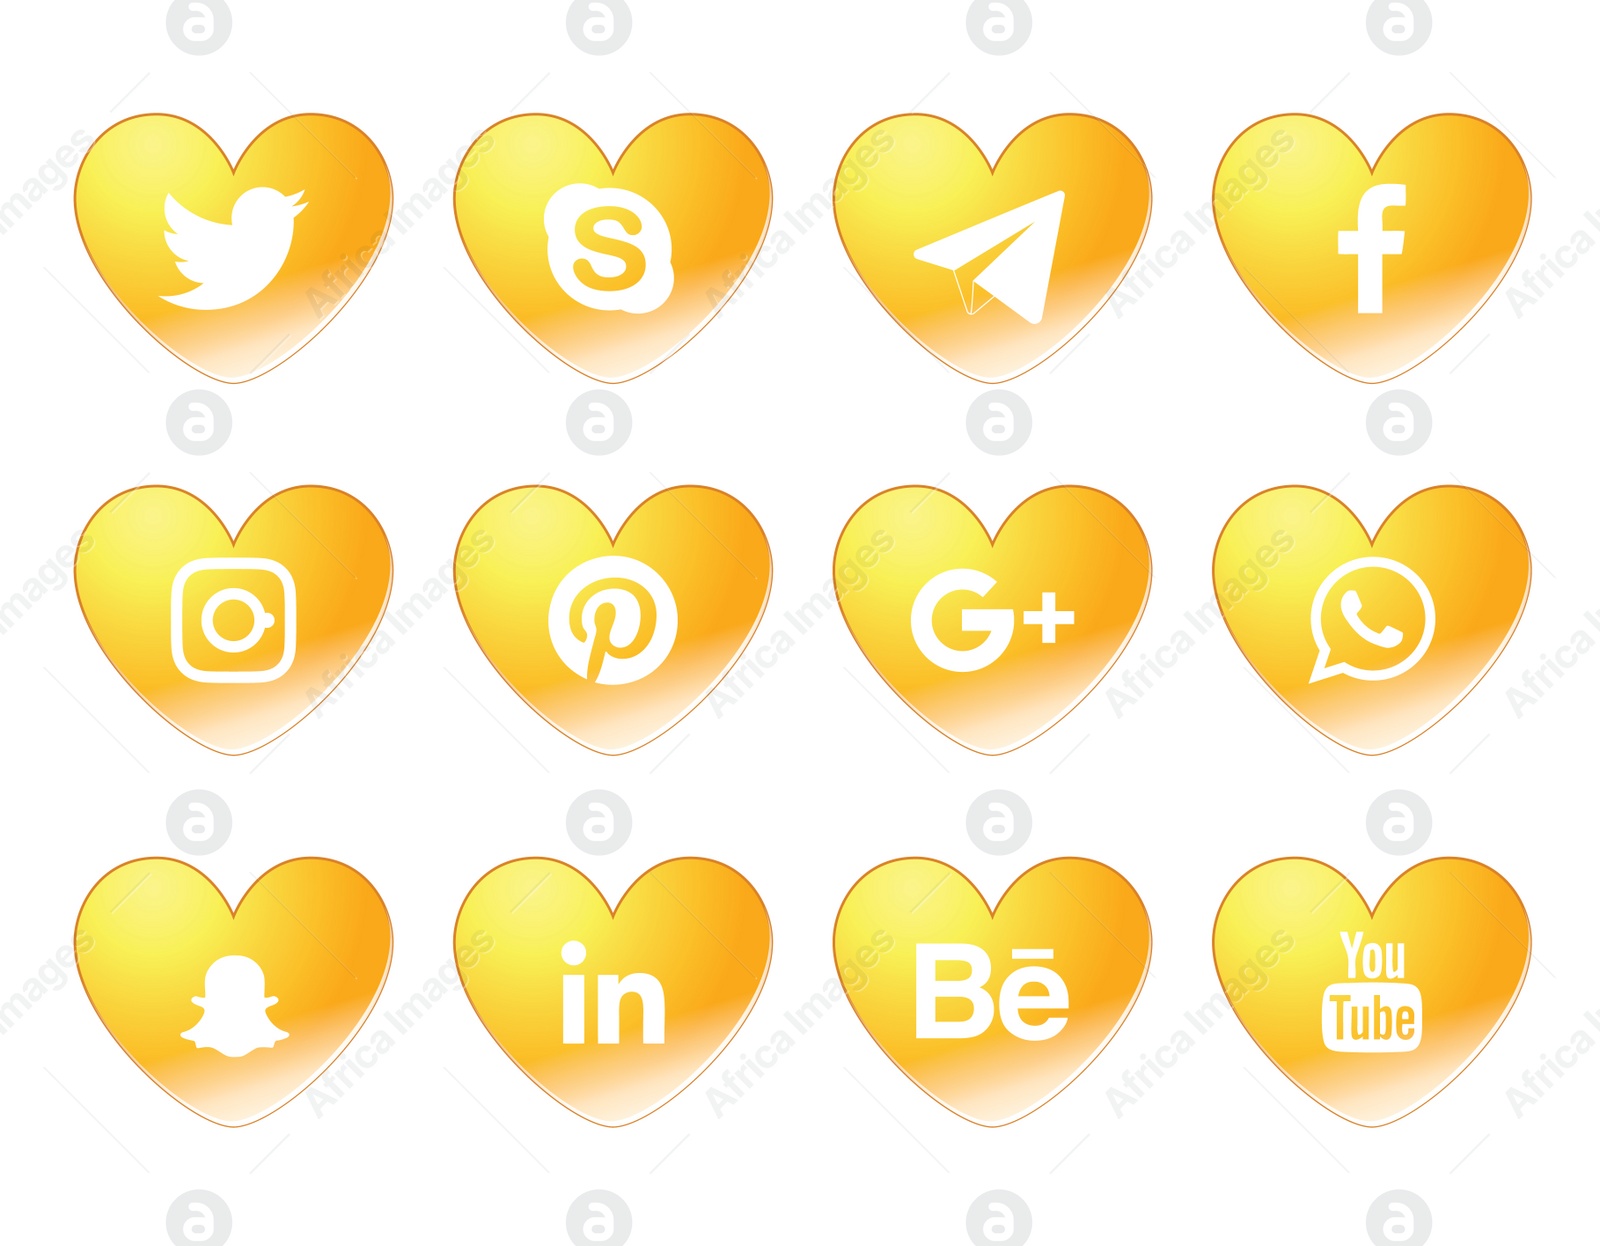 Illustration of MYKOLAIV, UKRAINE - APRIL 4, 2020: Collection of different social media apps icons